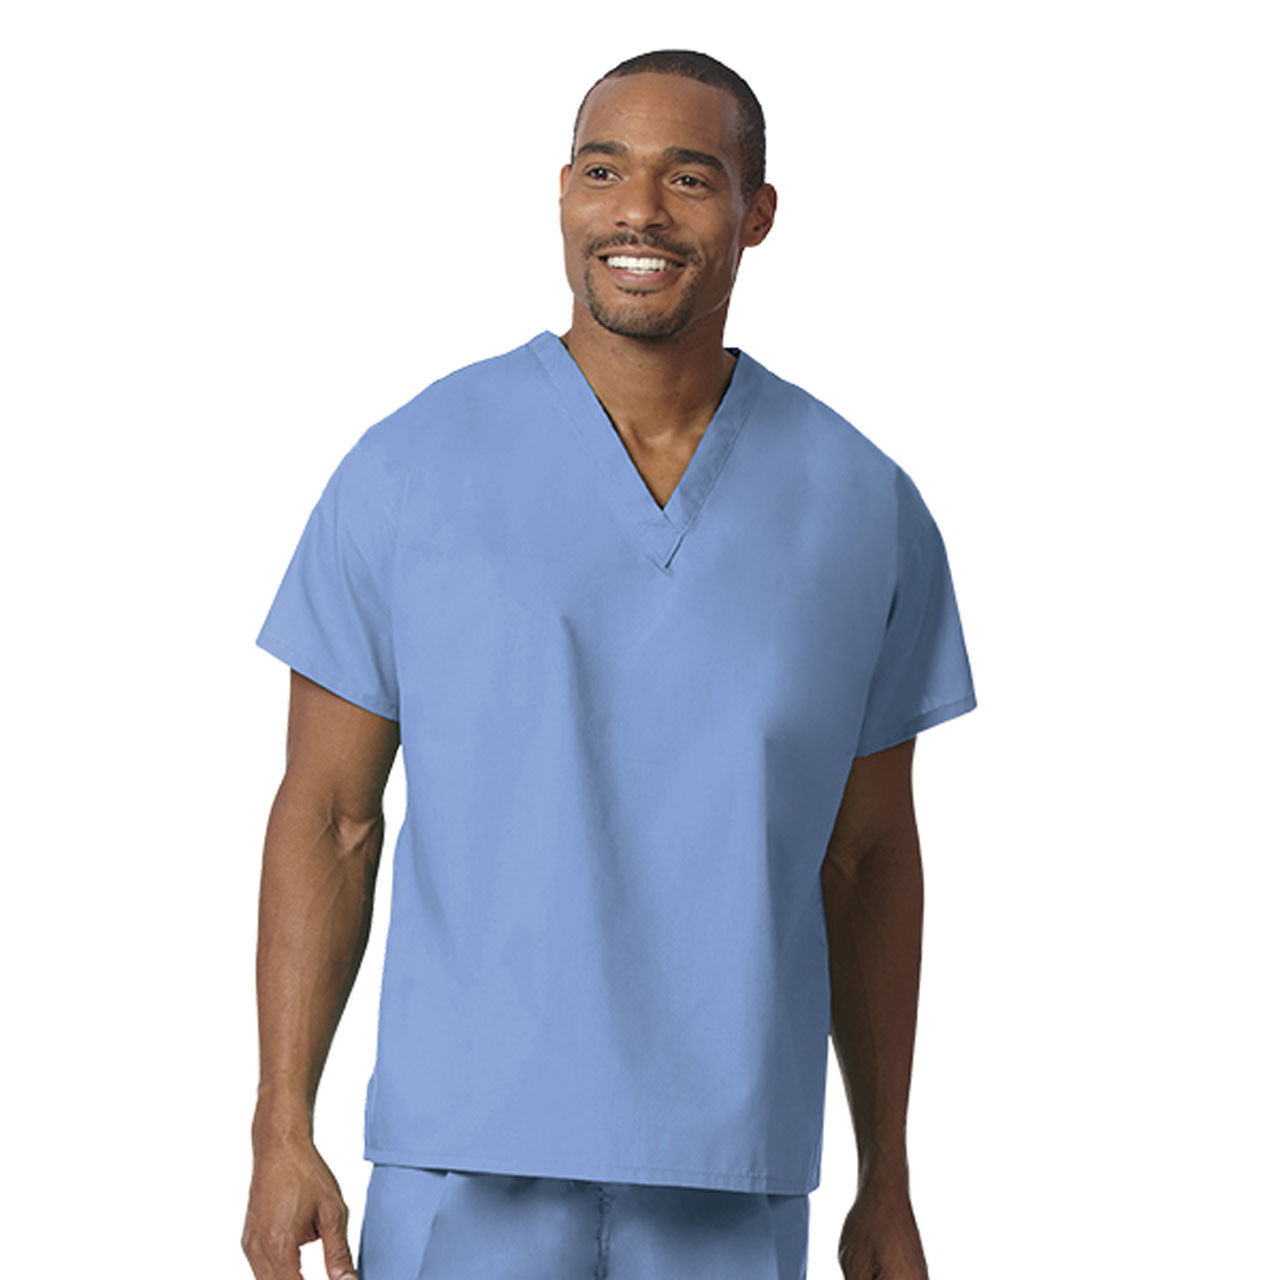 What materials are the blue surgical scrubs, ceil blue reversible v-neck set, made of?